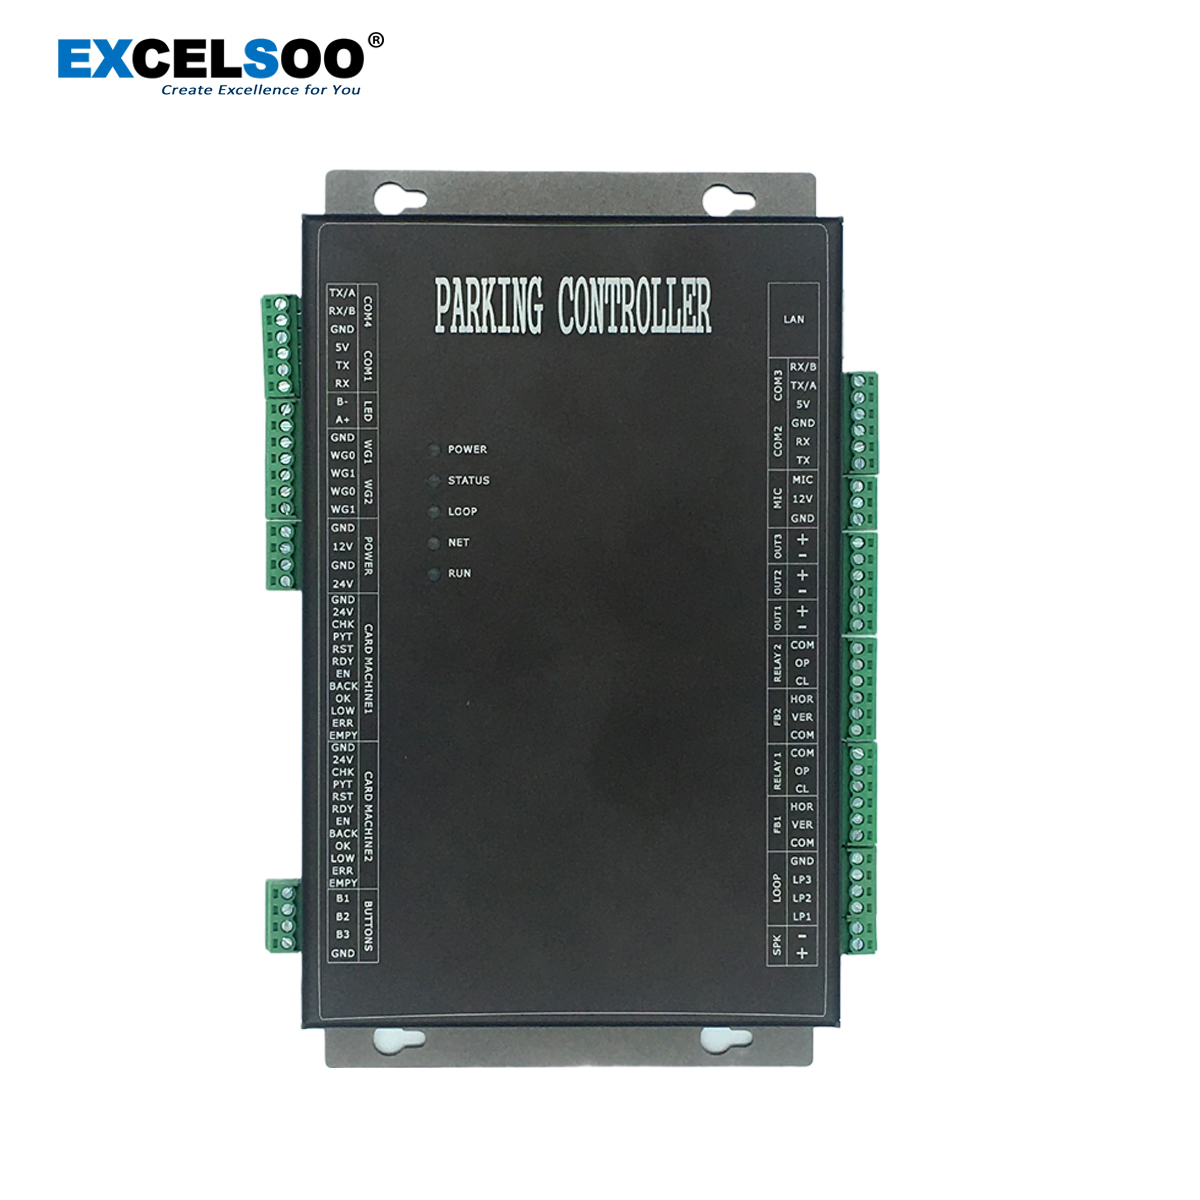 Excelsoo Smart Parking Access Controller XP-330